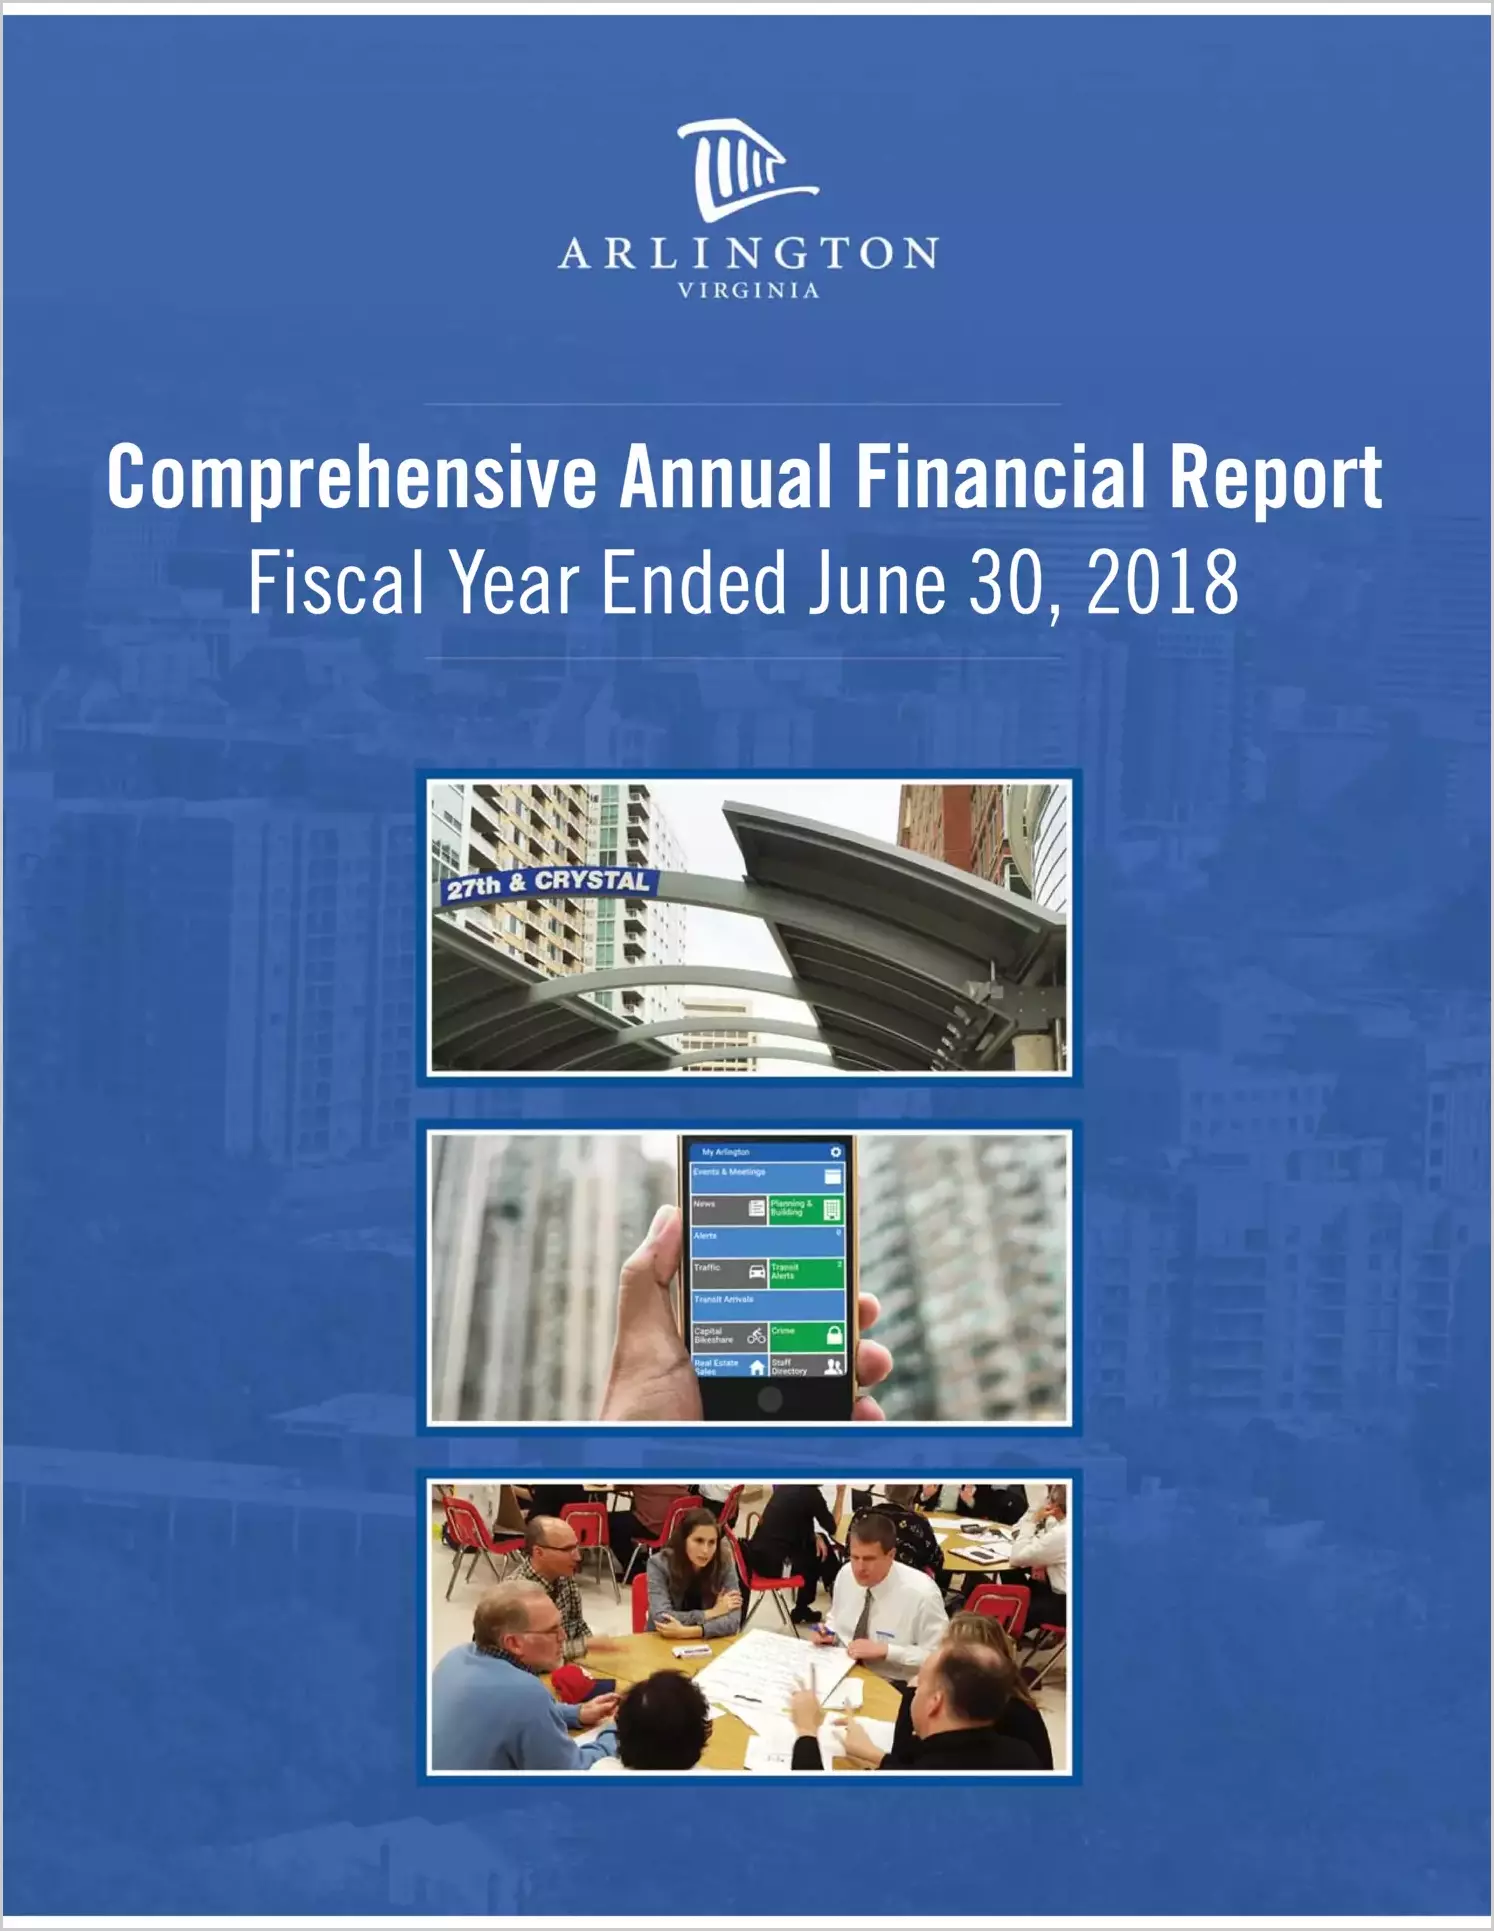 2018 Annual Financial Report for County of Arlington